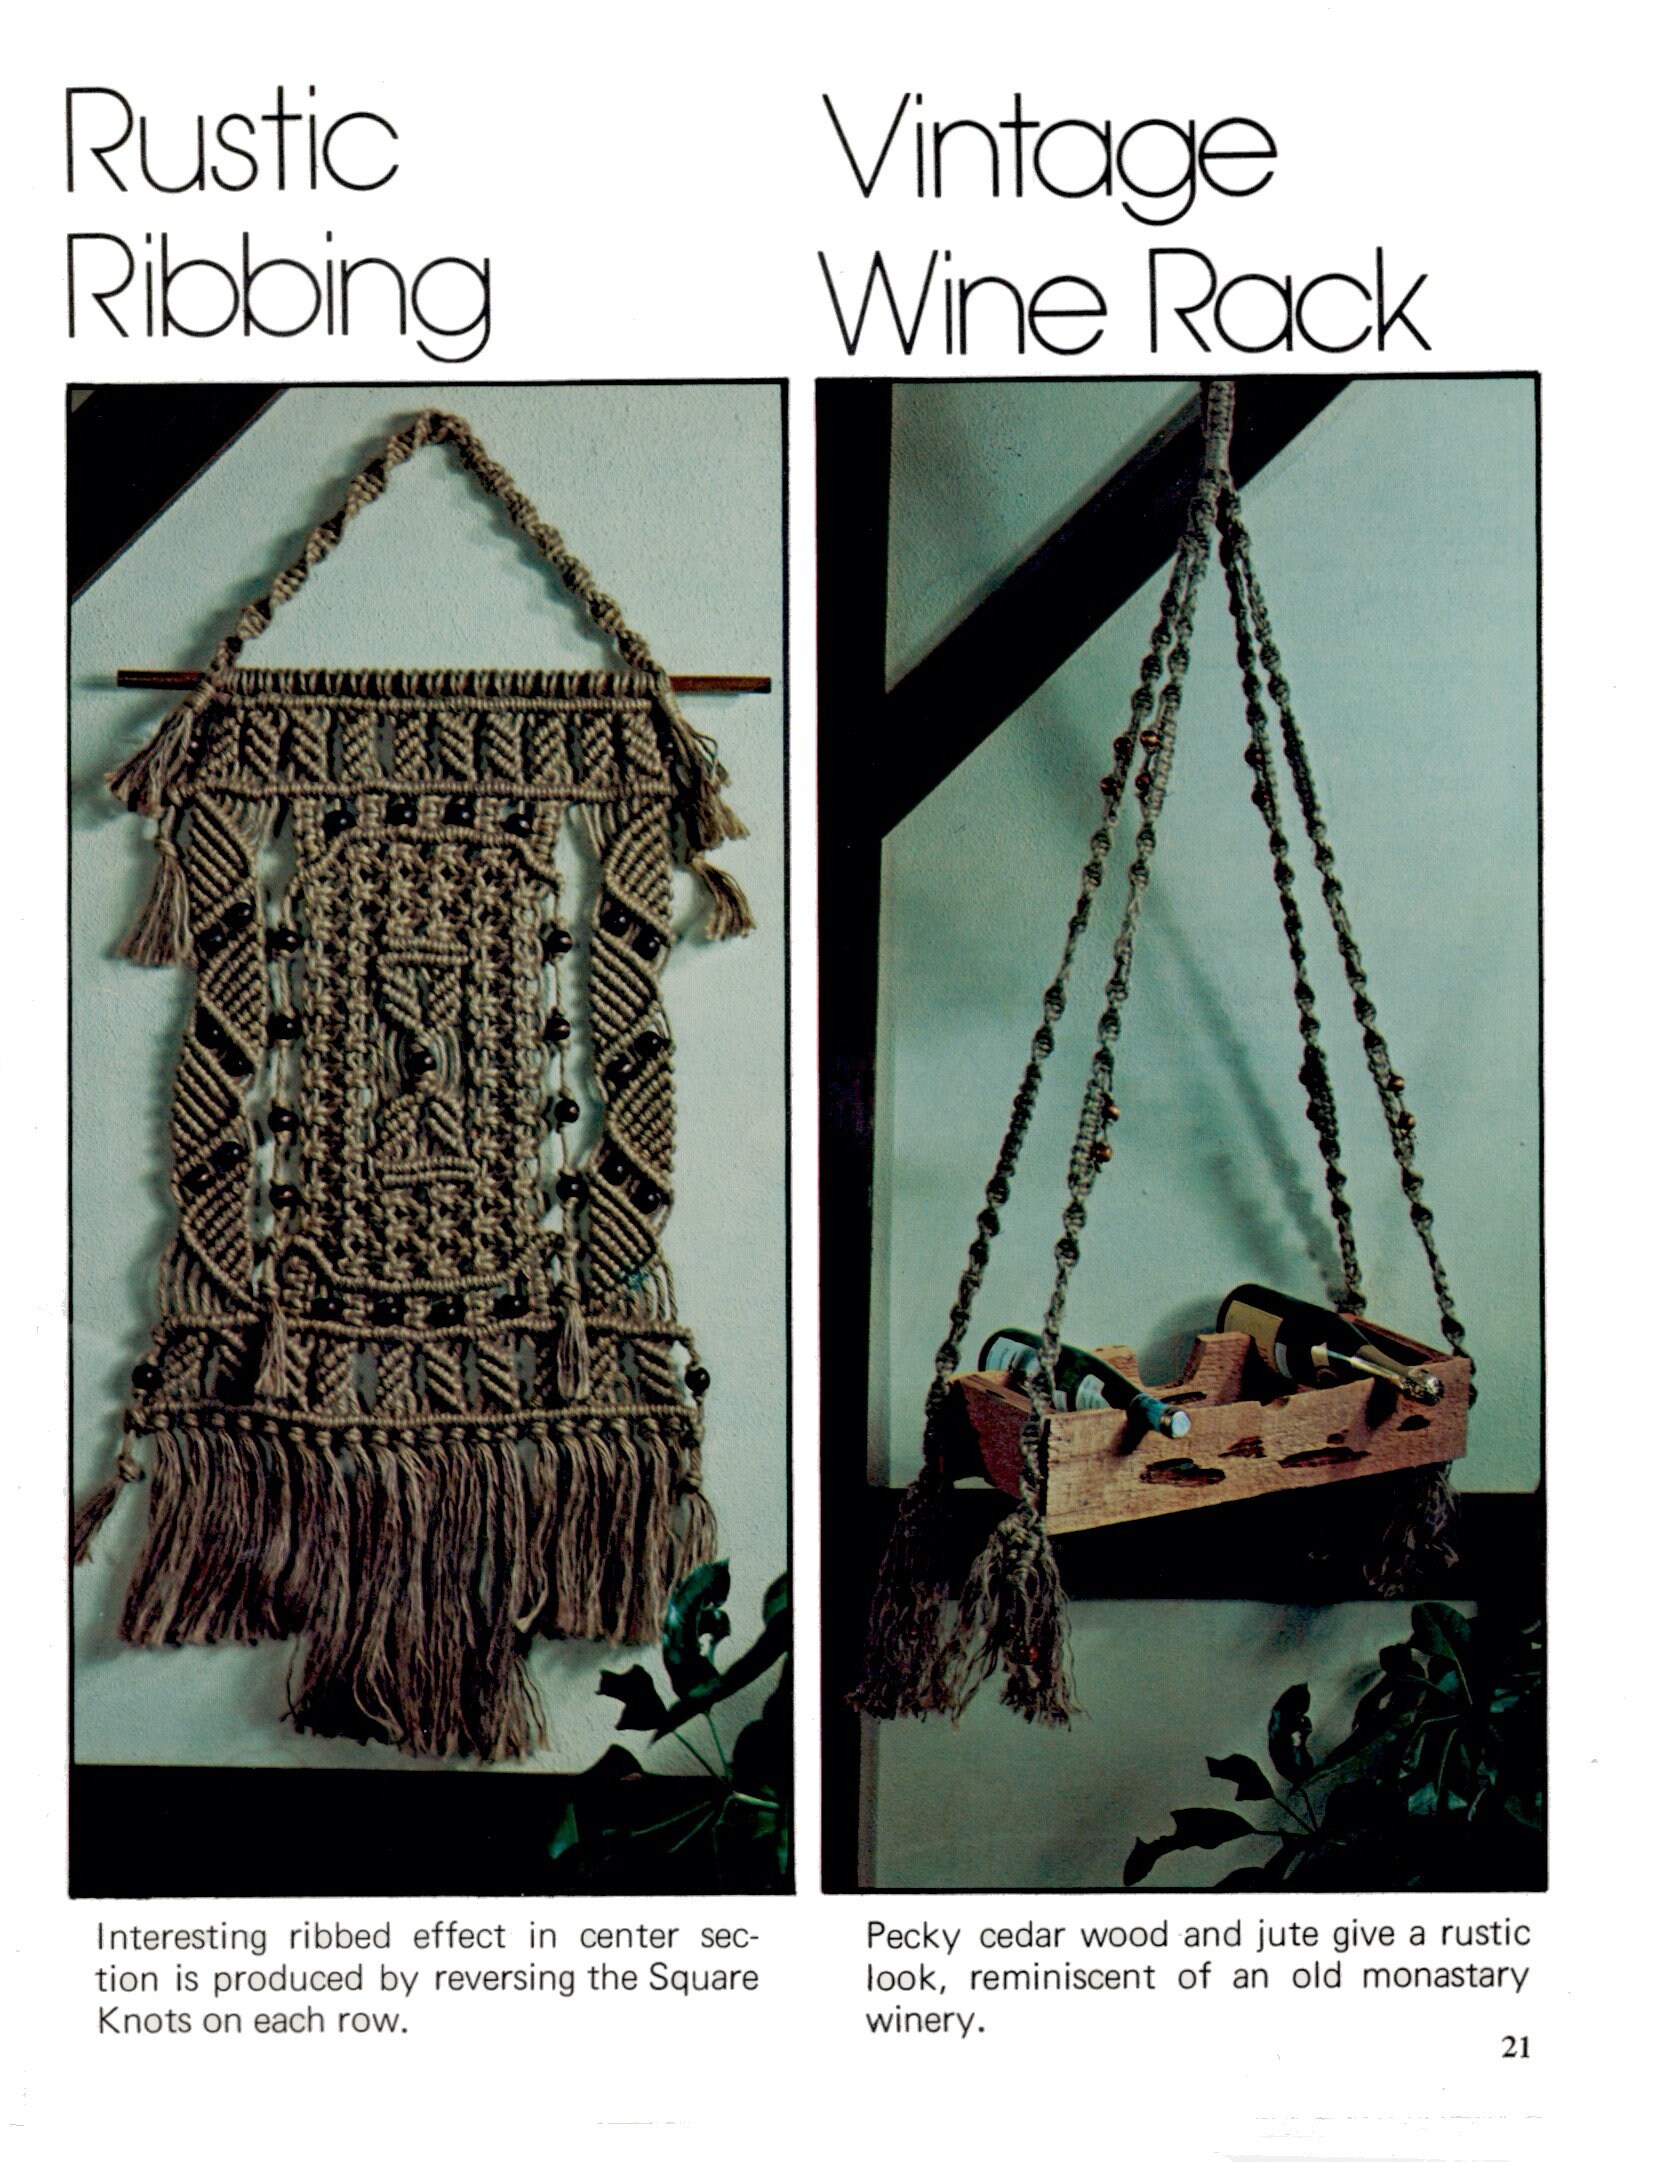 Learning To Macramé - 11 Macrame Projects Instant Download PDF 24